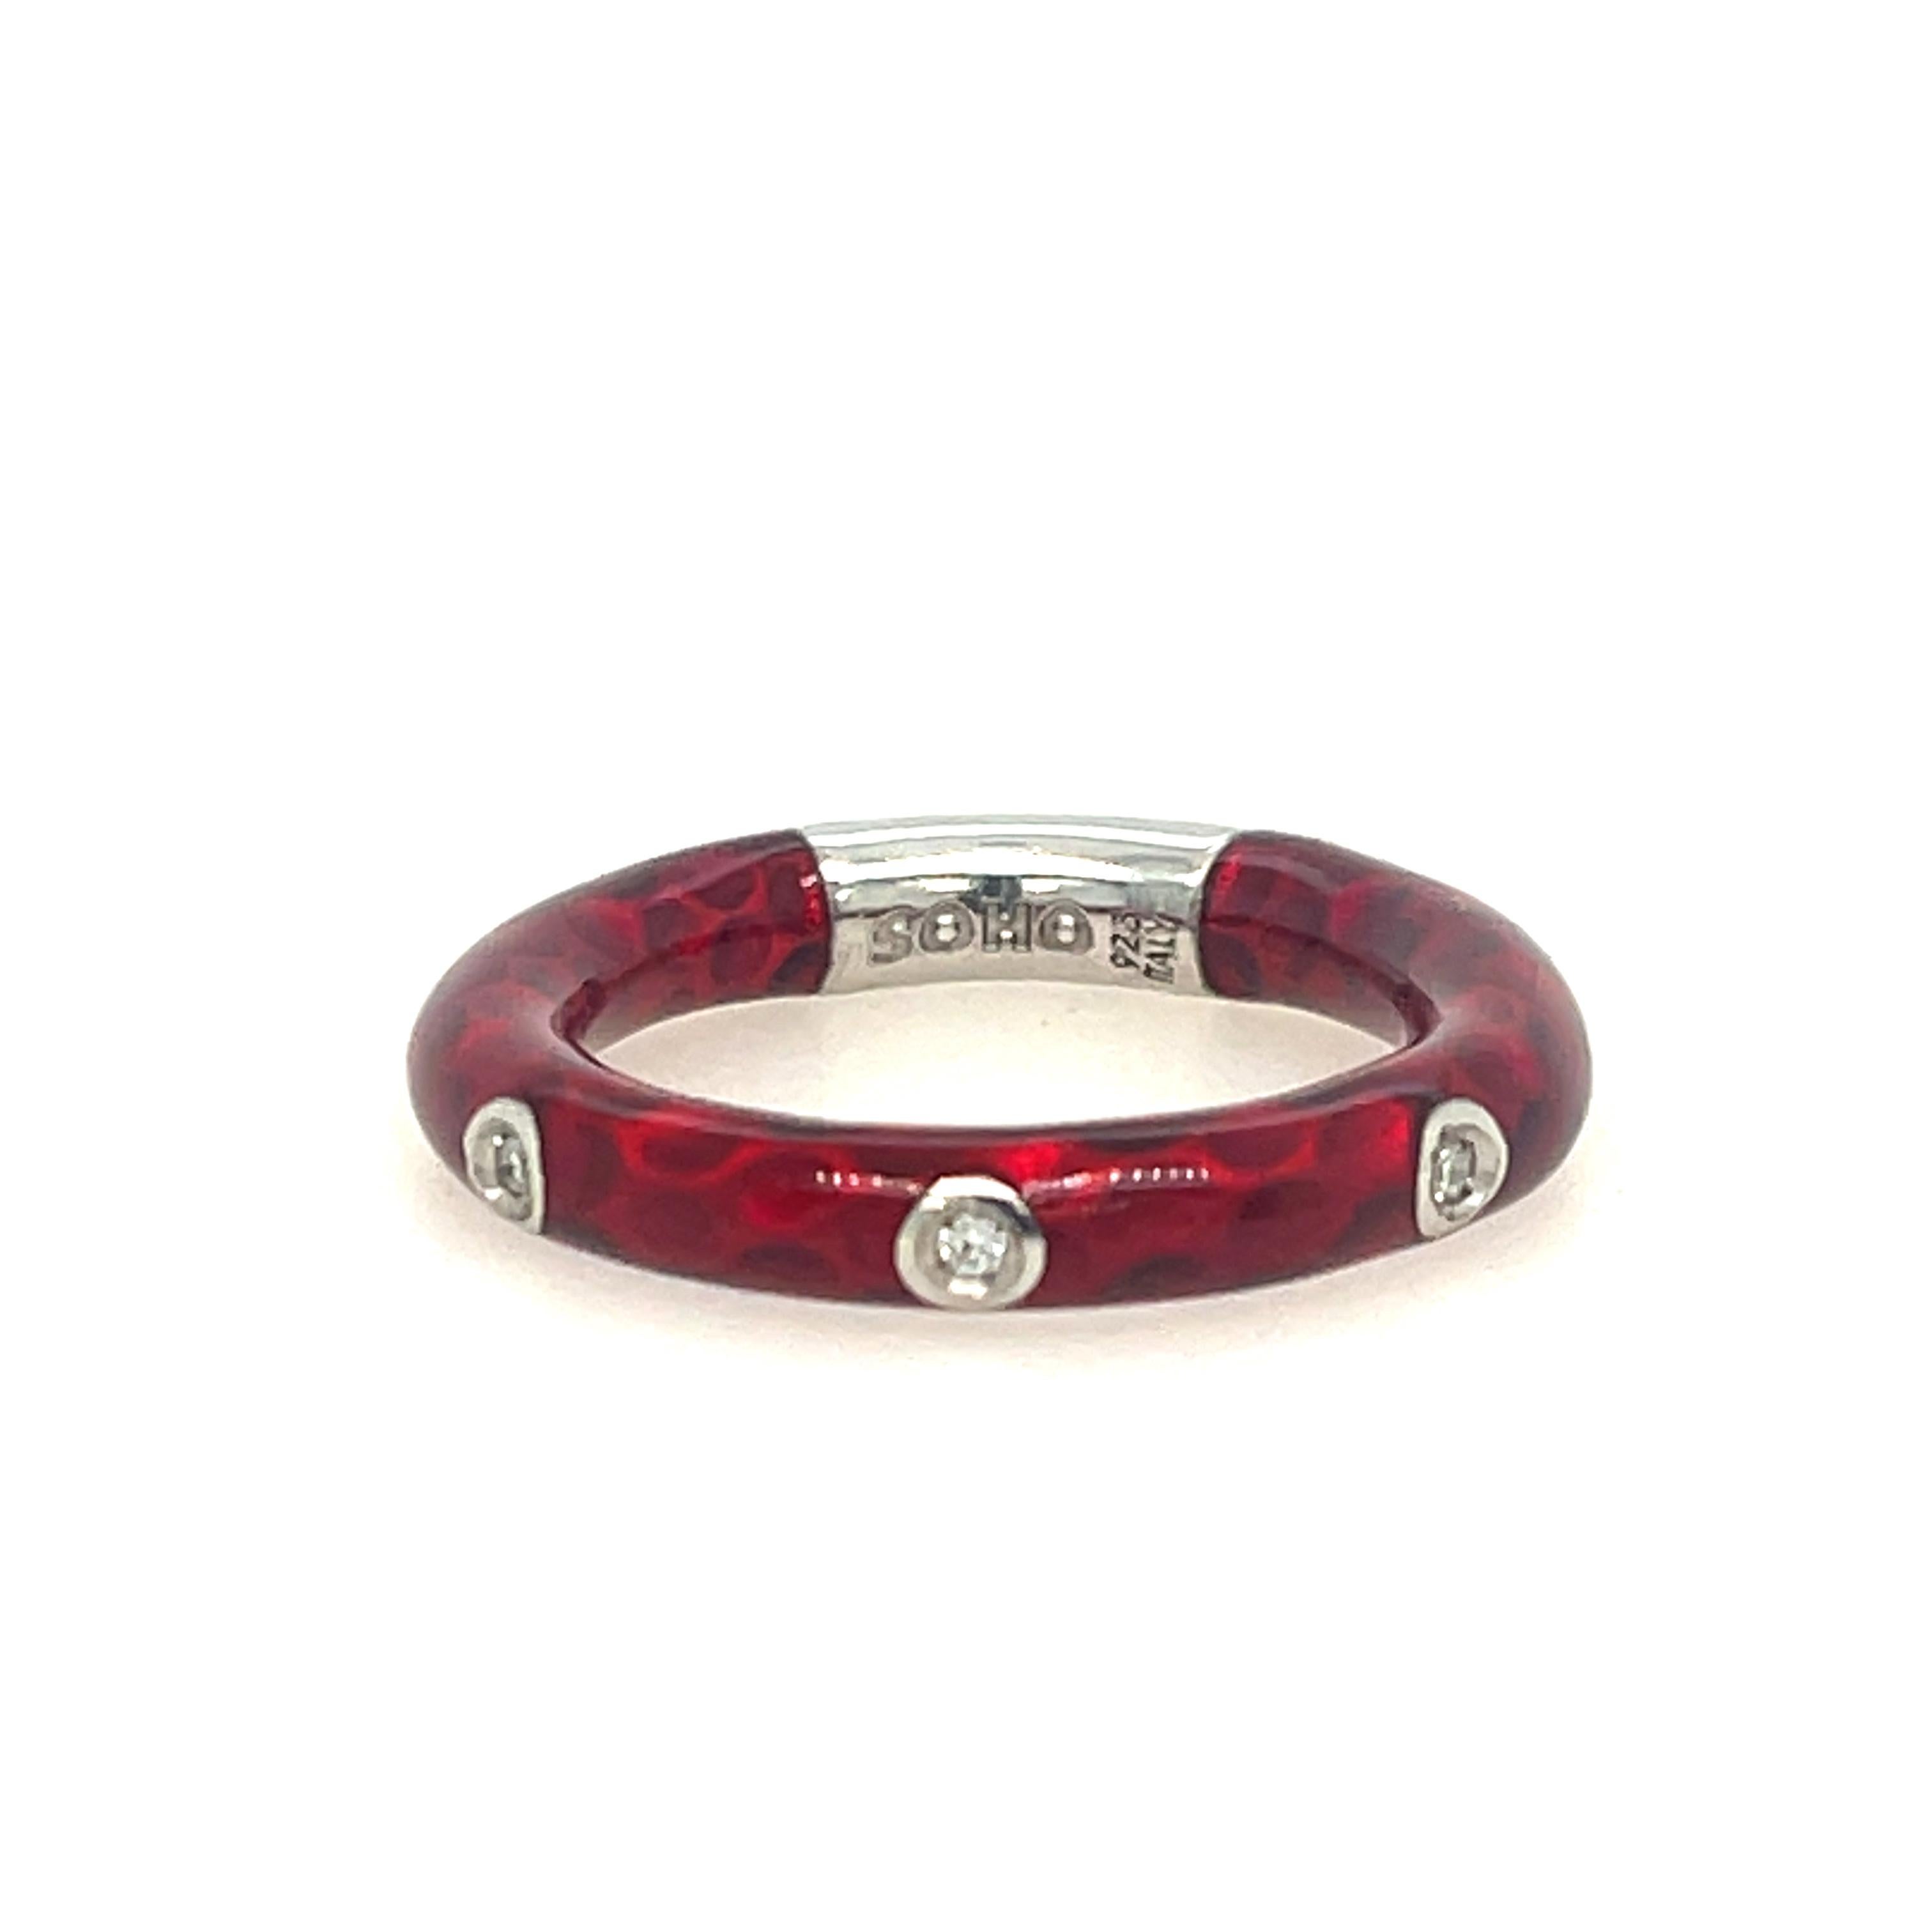 Sterling Silver and red enamel ring. Features three round diamond with 0.06ctw.

Ring size 7.25